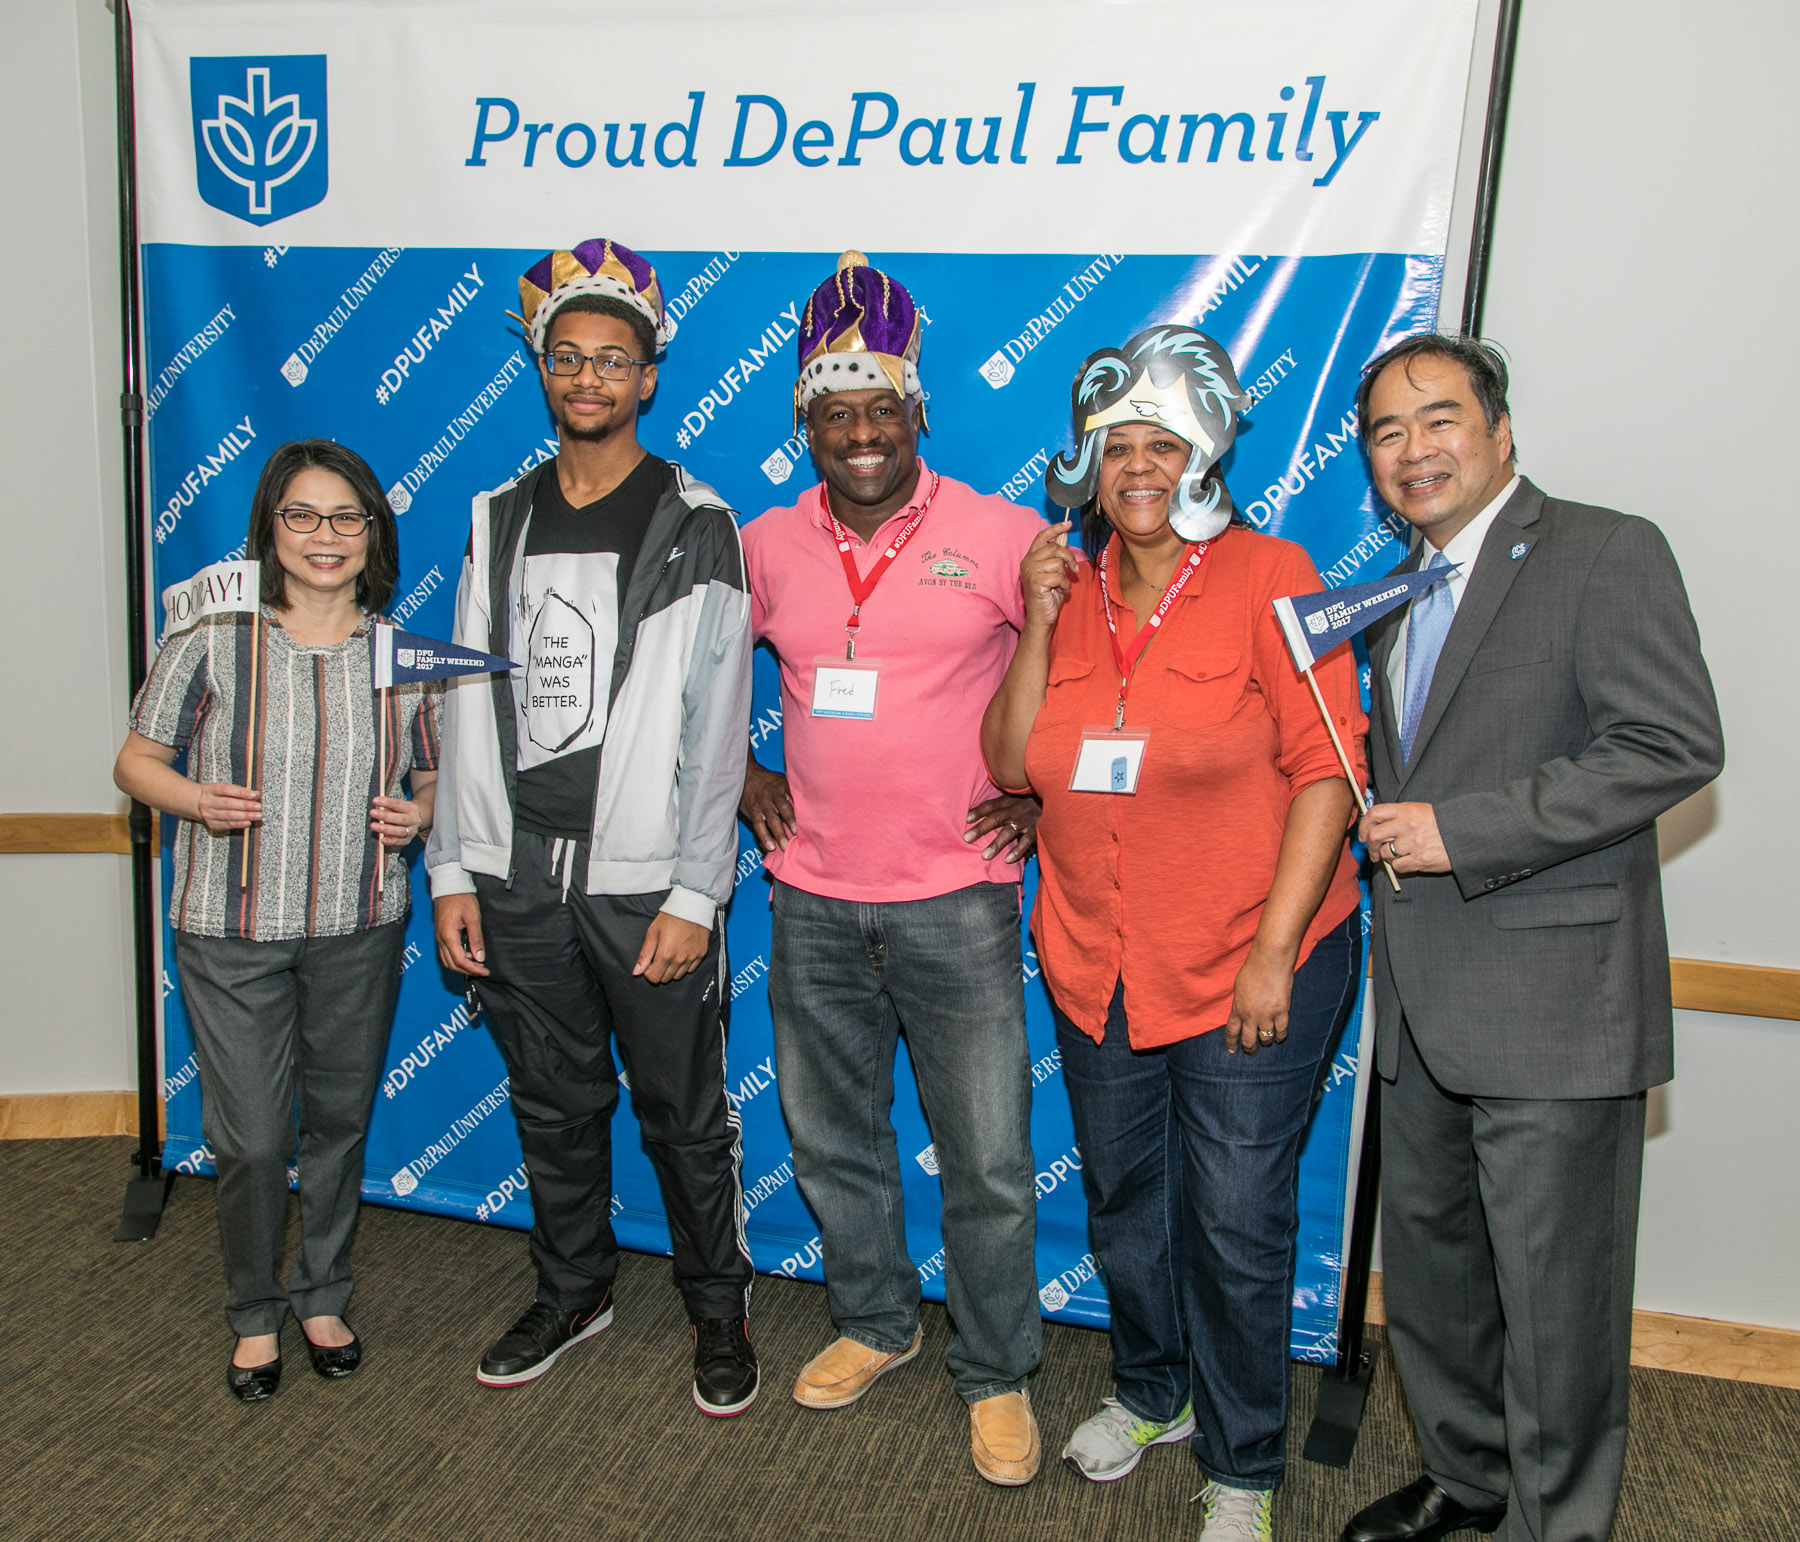 Josephine Esteban, left, and DePaul University President A. Gabriel Esteban, Ph.D., right, pose with the Broomfield family (Koby, Fred and Beverly) as they arrive for the annual Family Weekend Kickoff celebration. Student groups performed for the guests during a buffet dinner that started the weekend of festivities. (DePaul University/Jamie Moncrief)